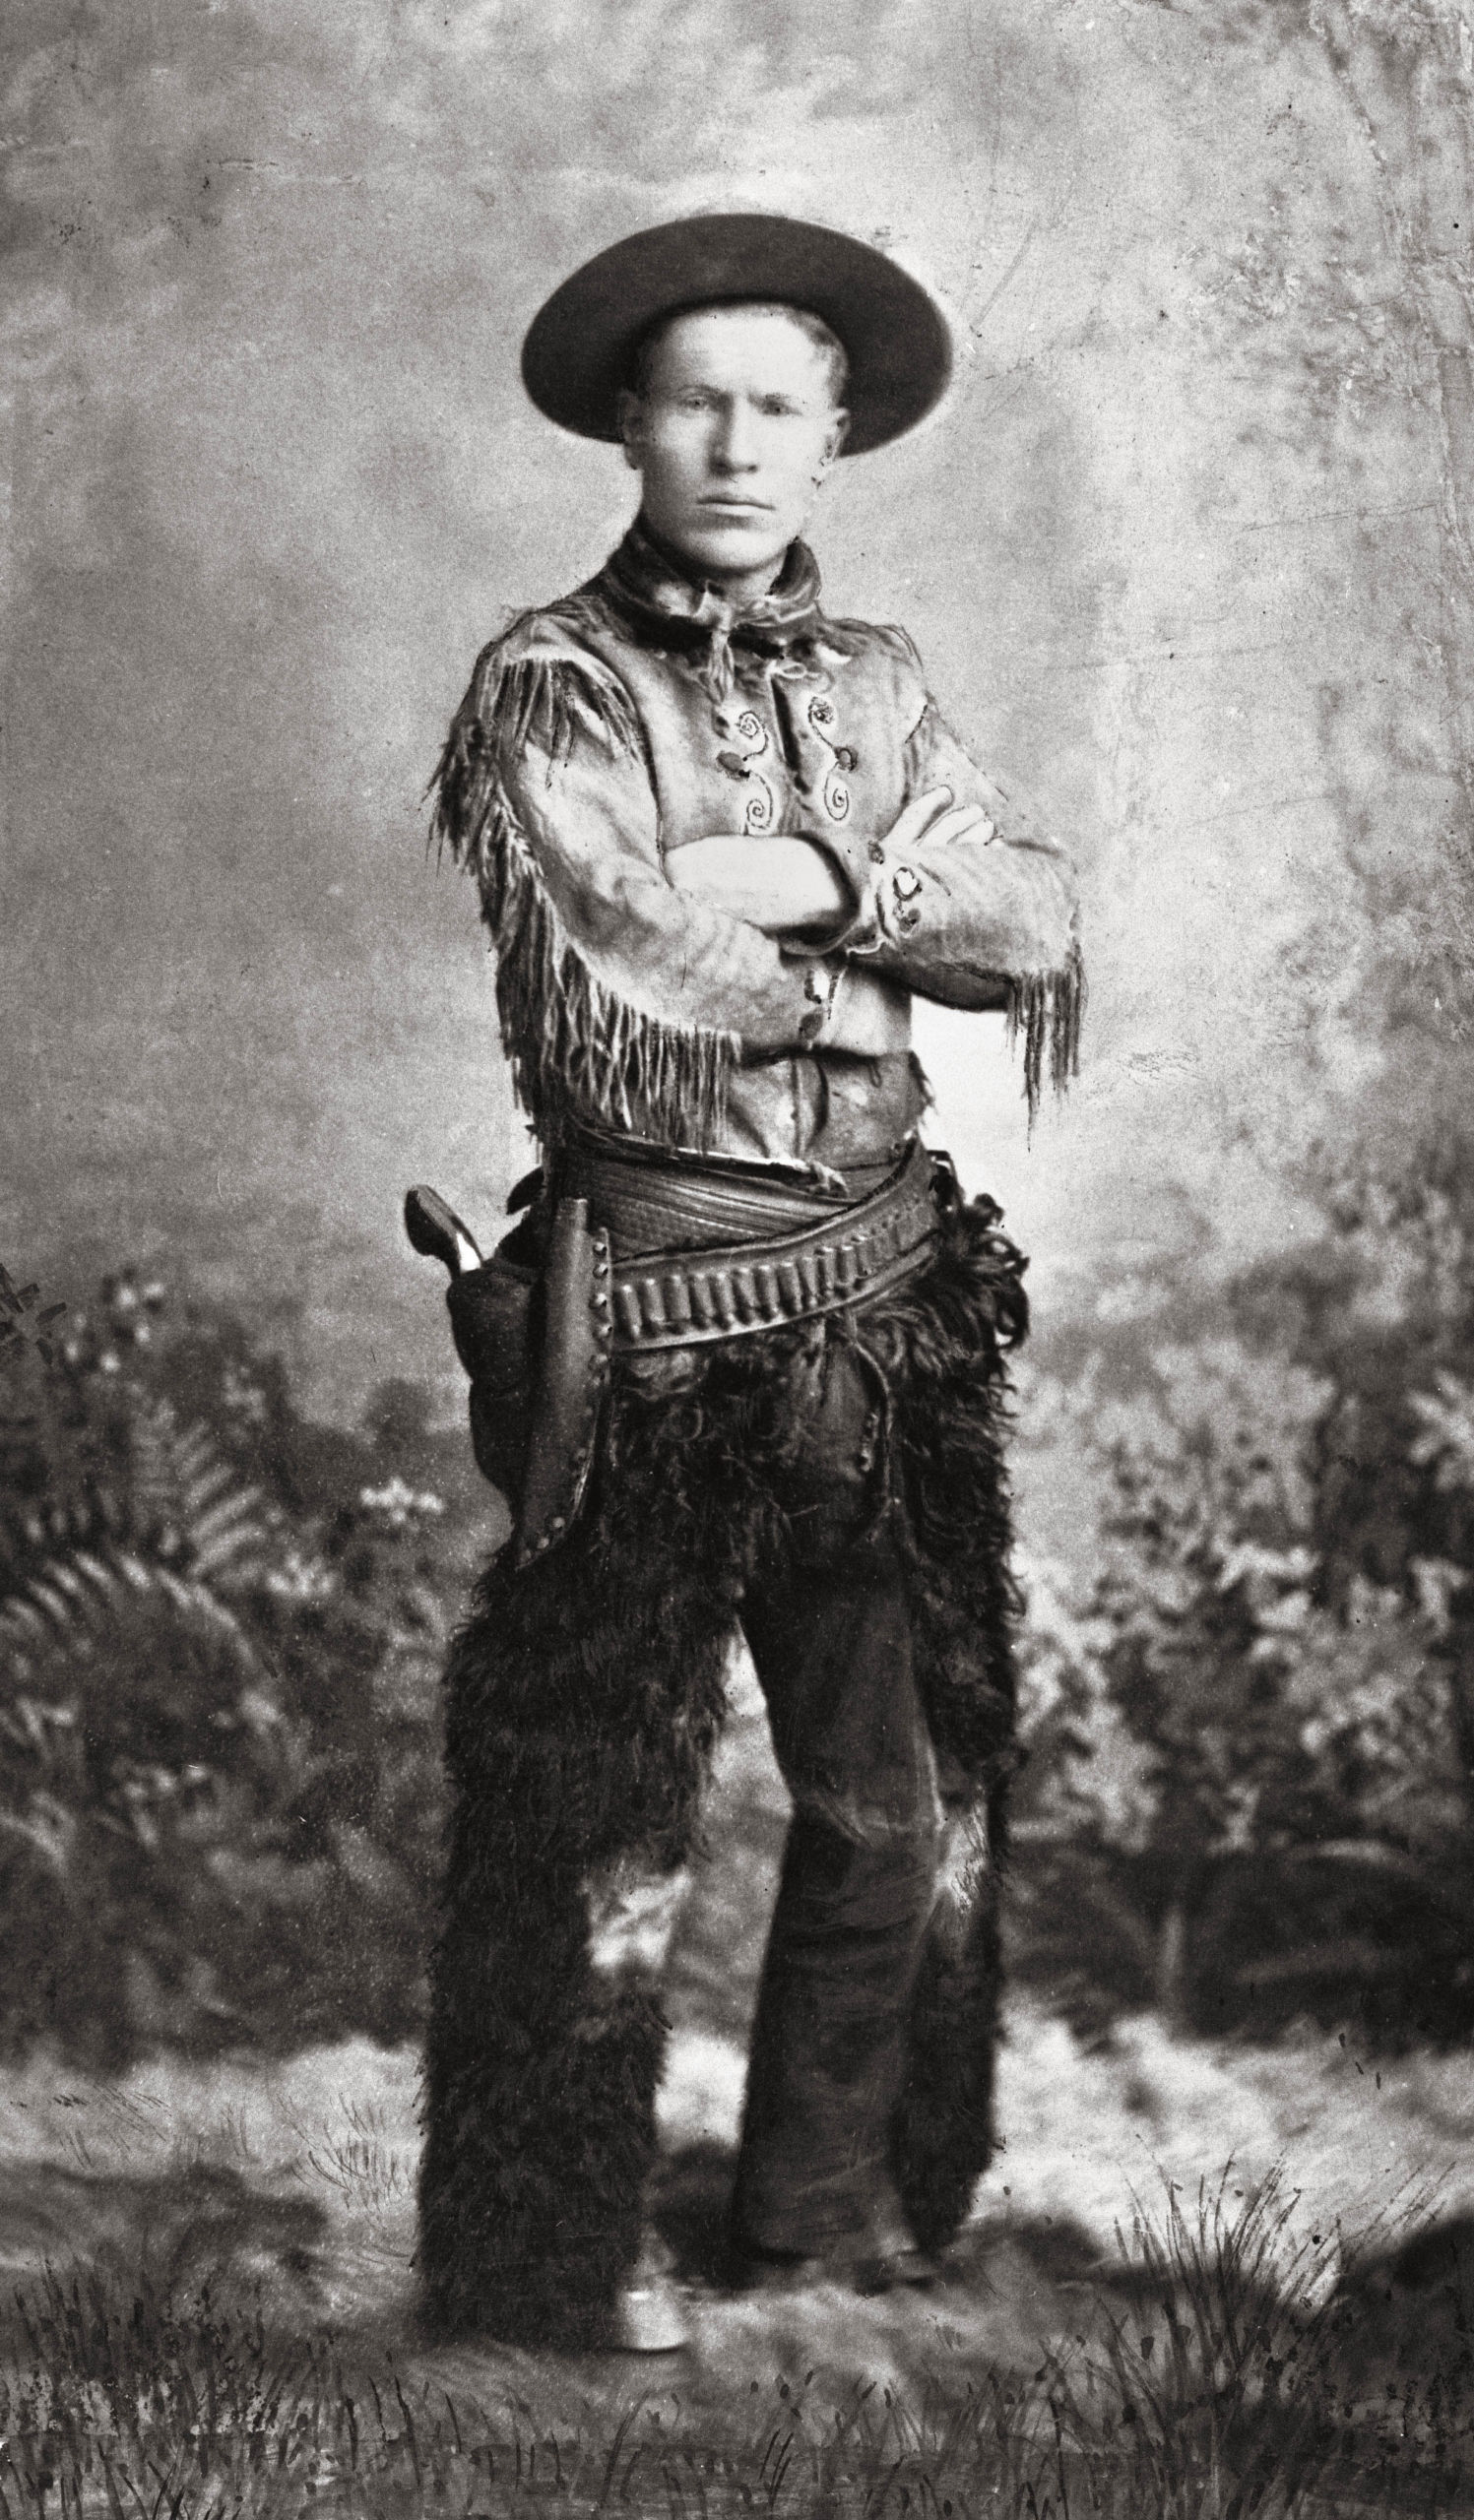 A young Charles Russell posing in cowboy gear